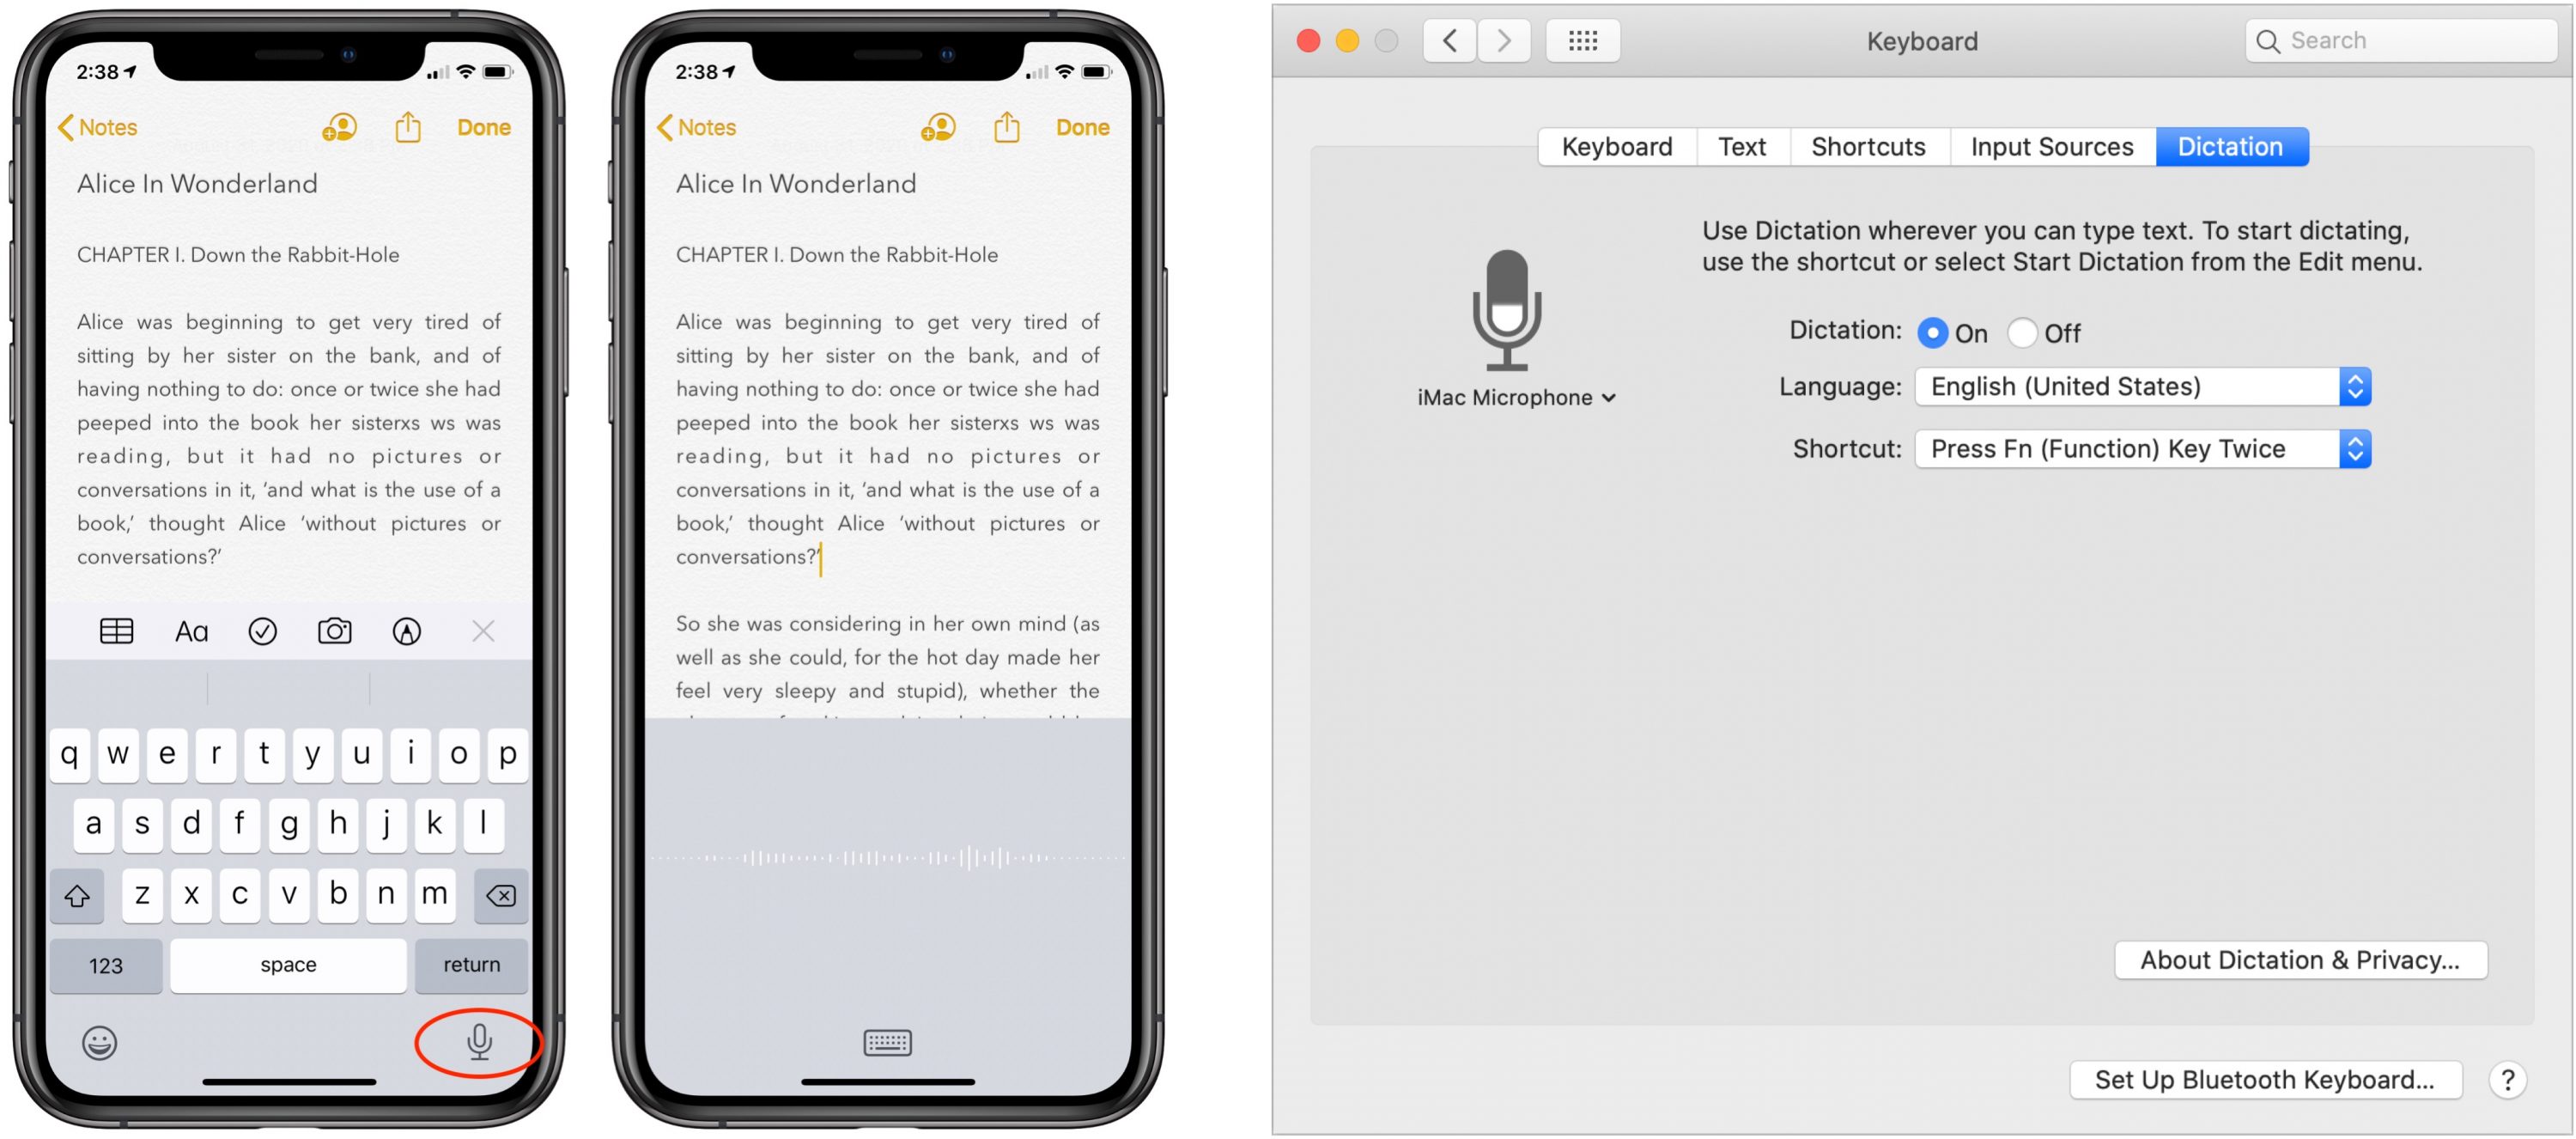 google voice typing for mac